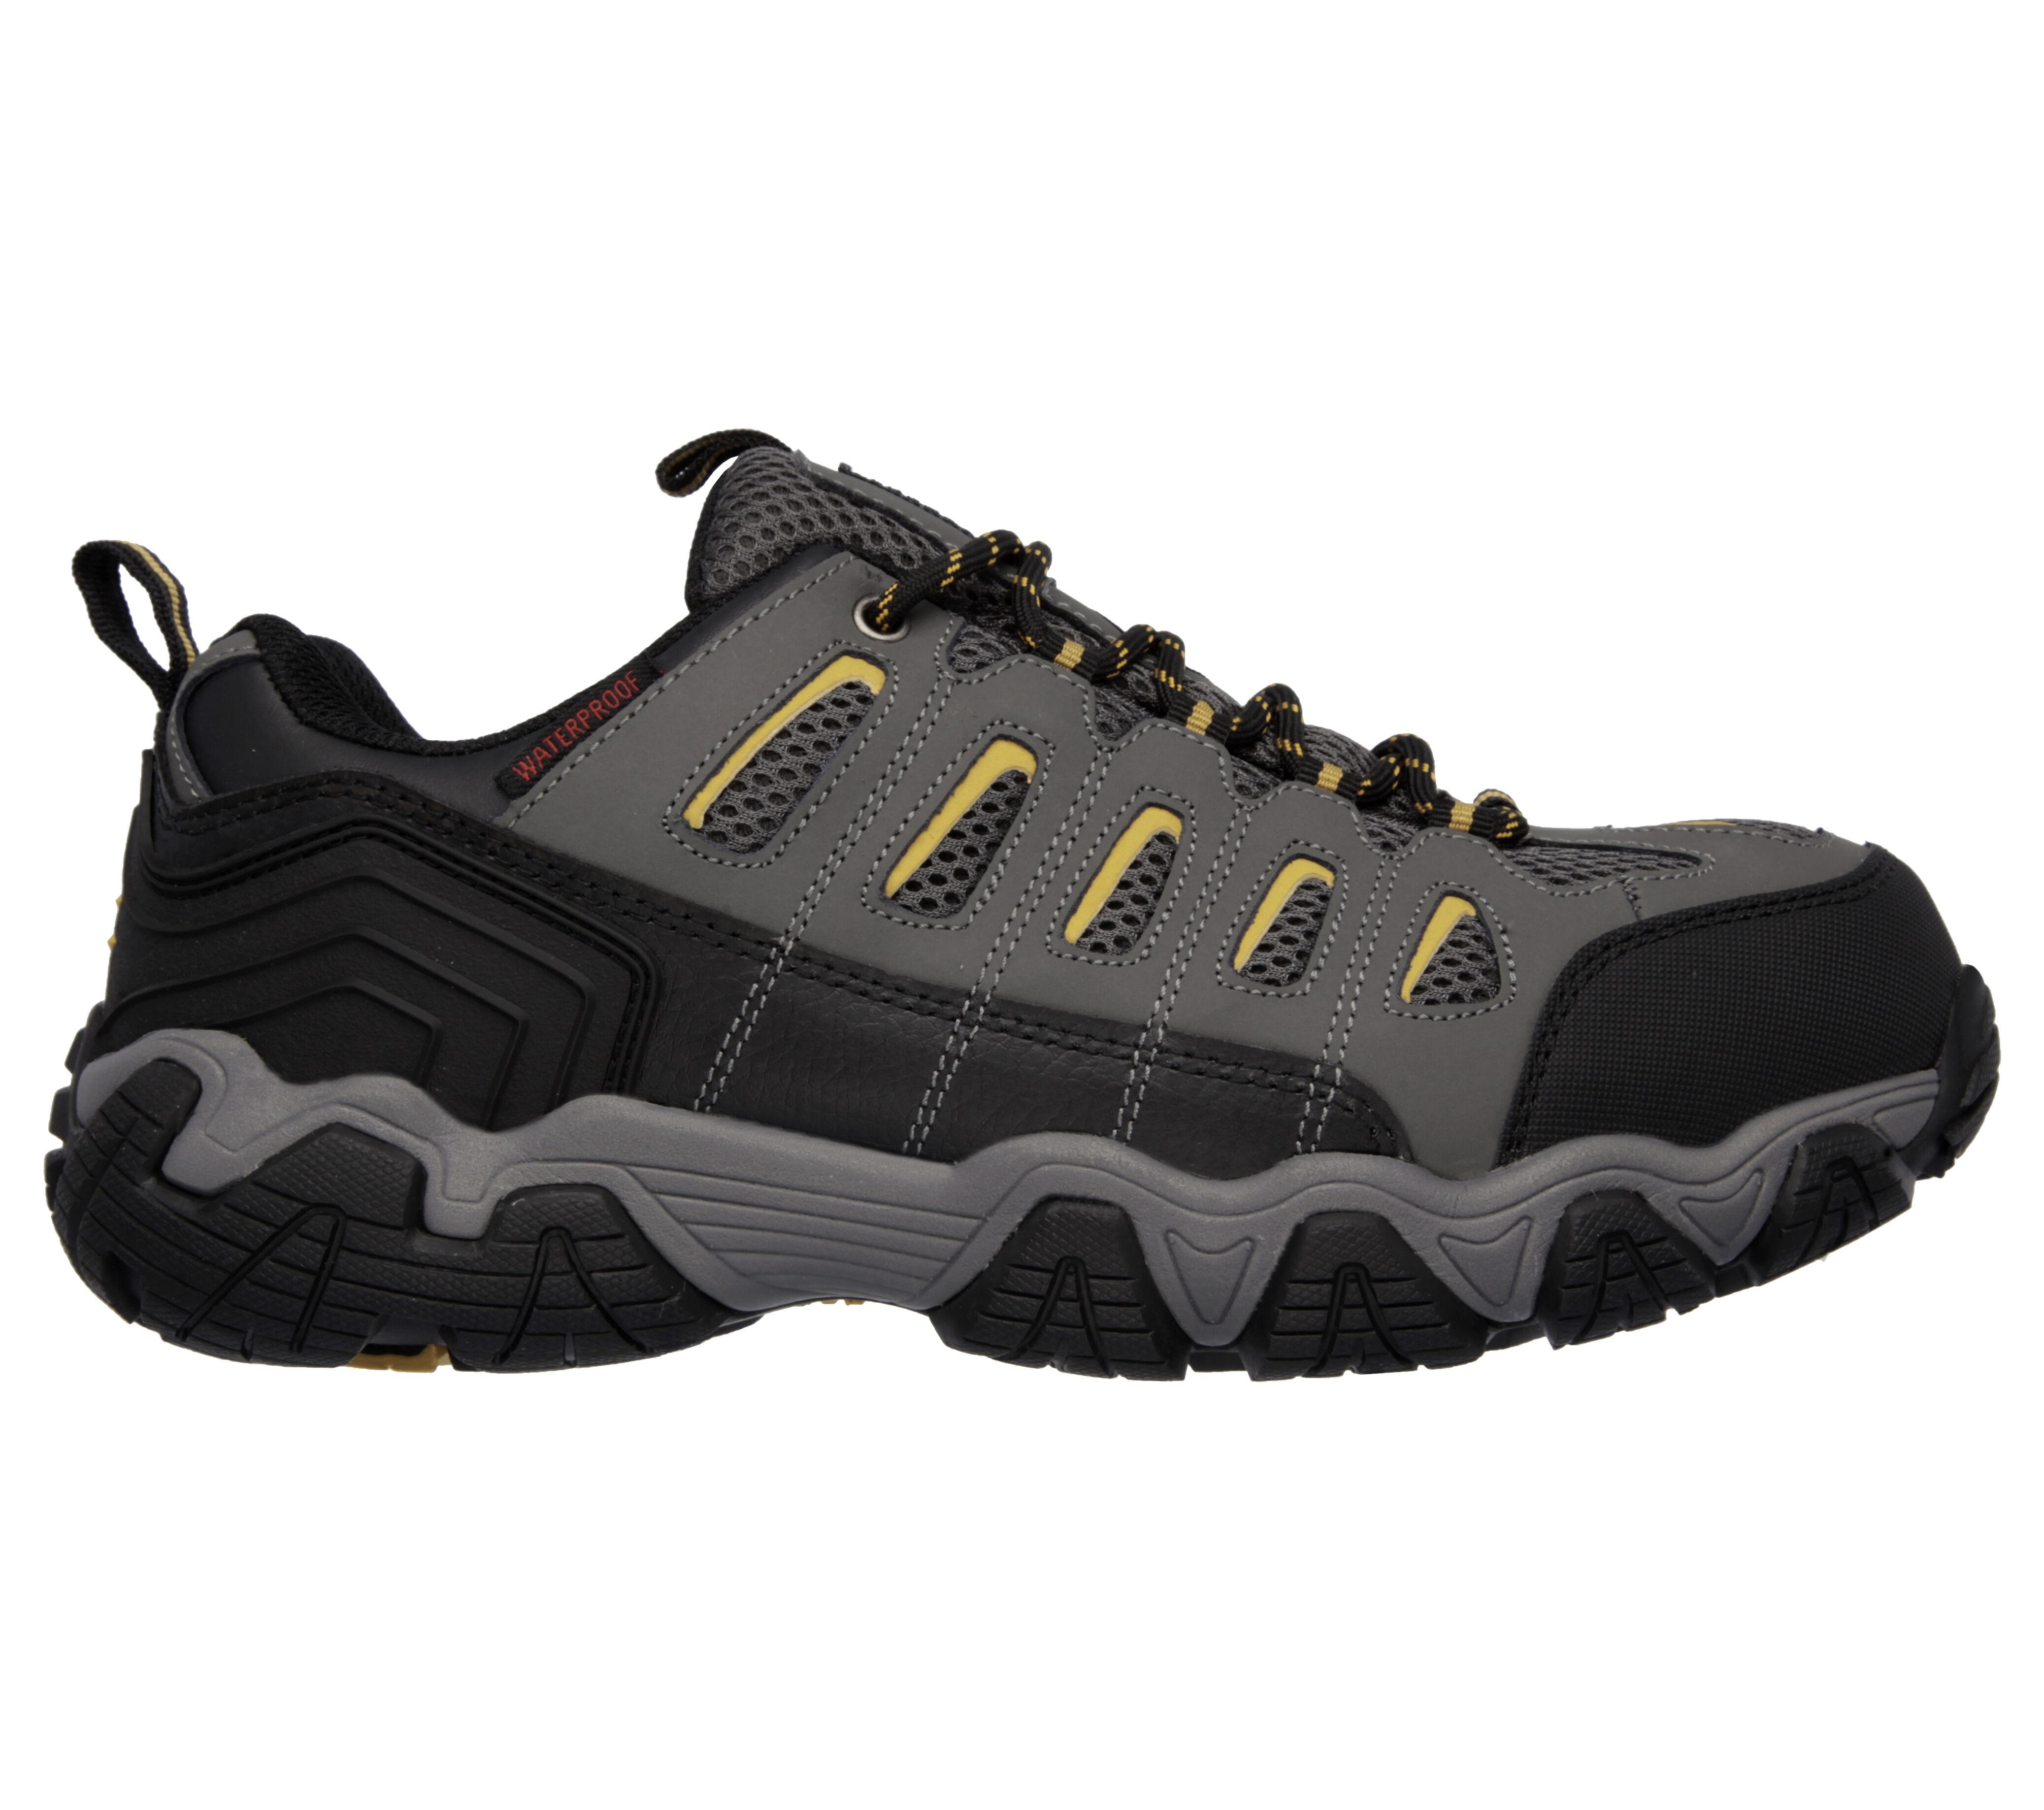 skechers work shoes malaysia